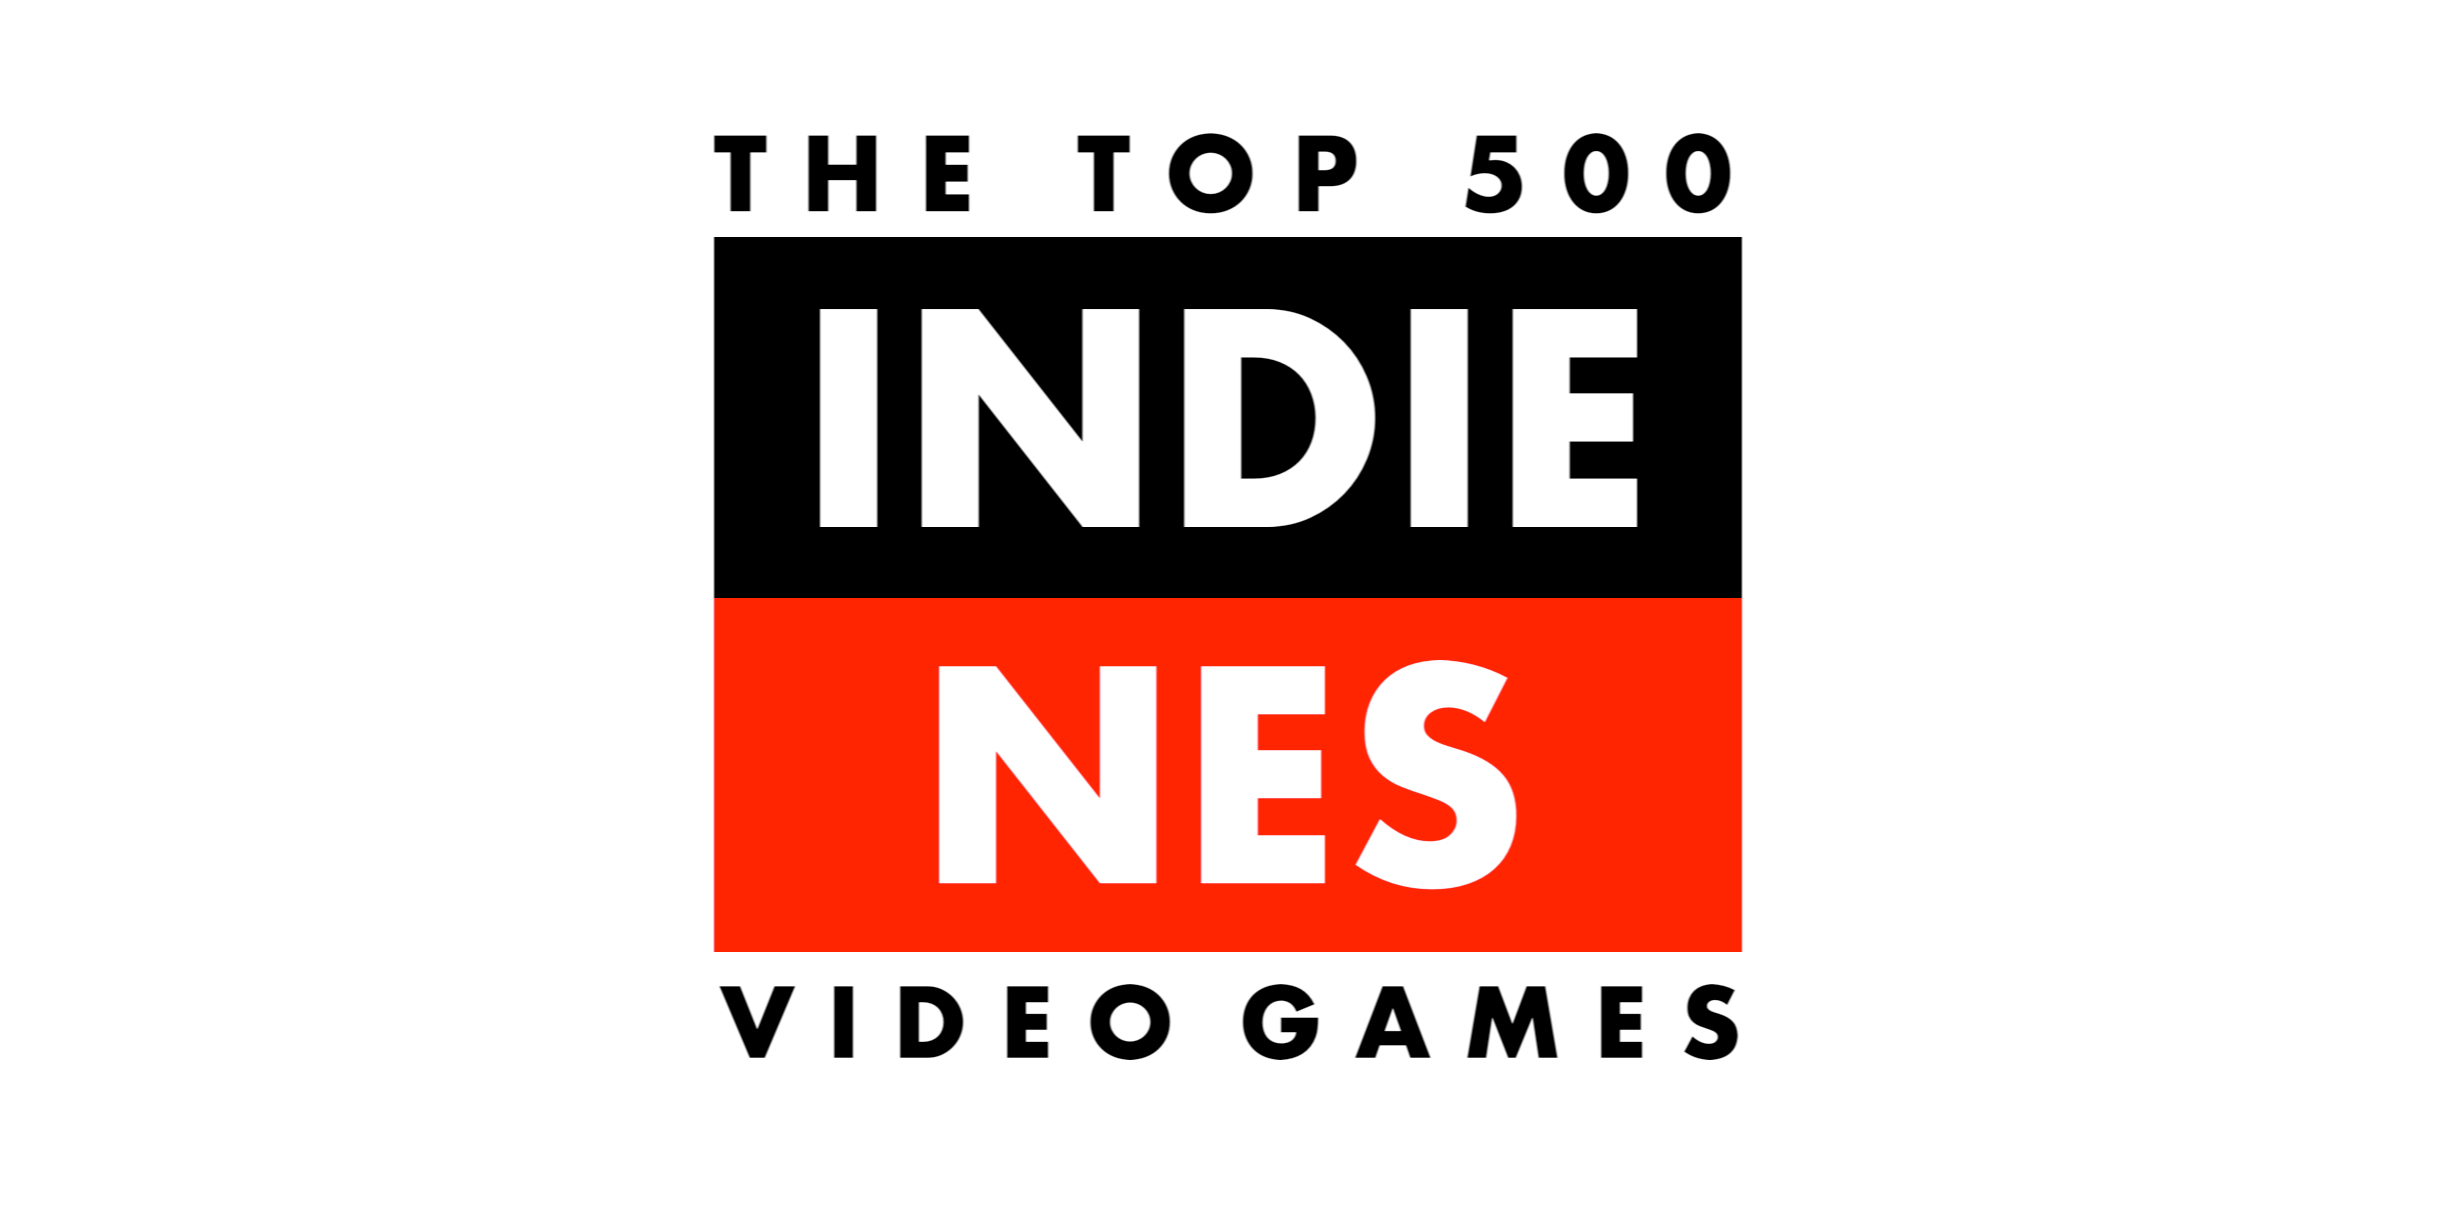 The Top 500 Indie NES Games, Vol. 7 - by Seth Abramson